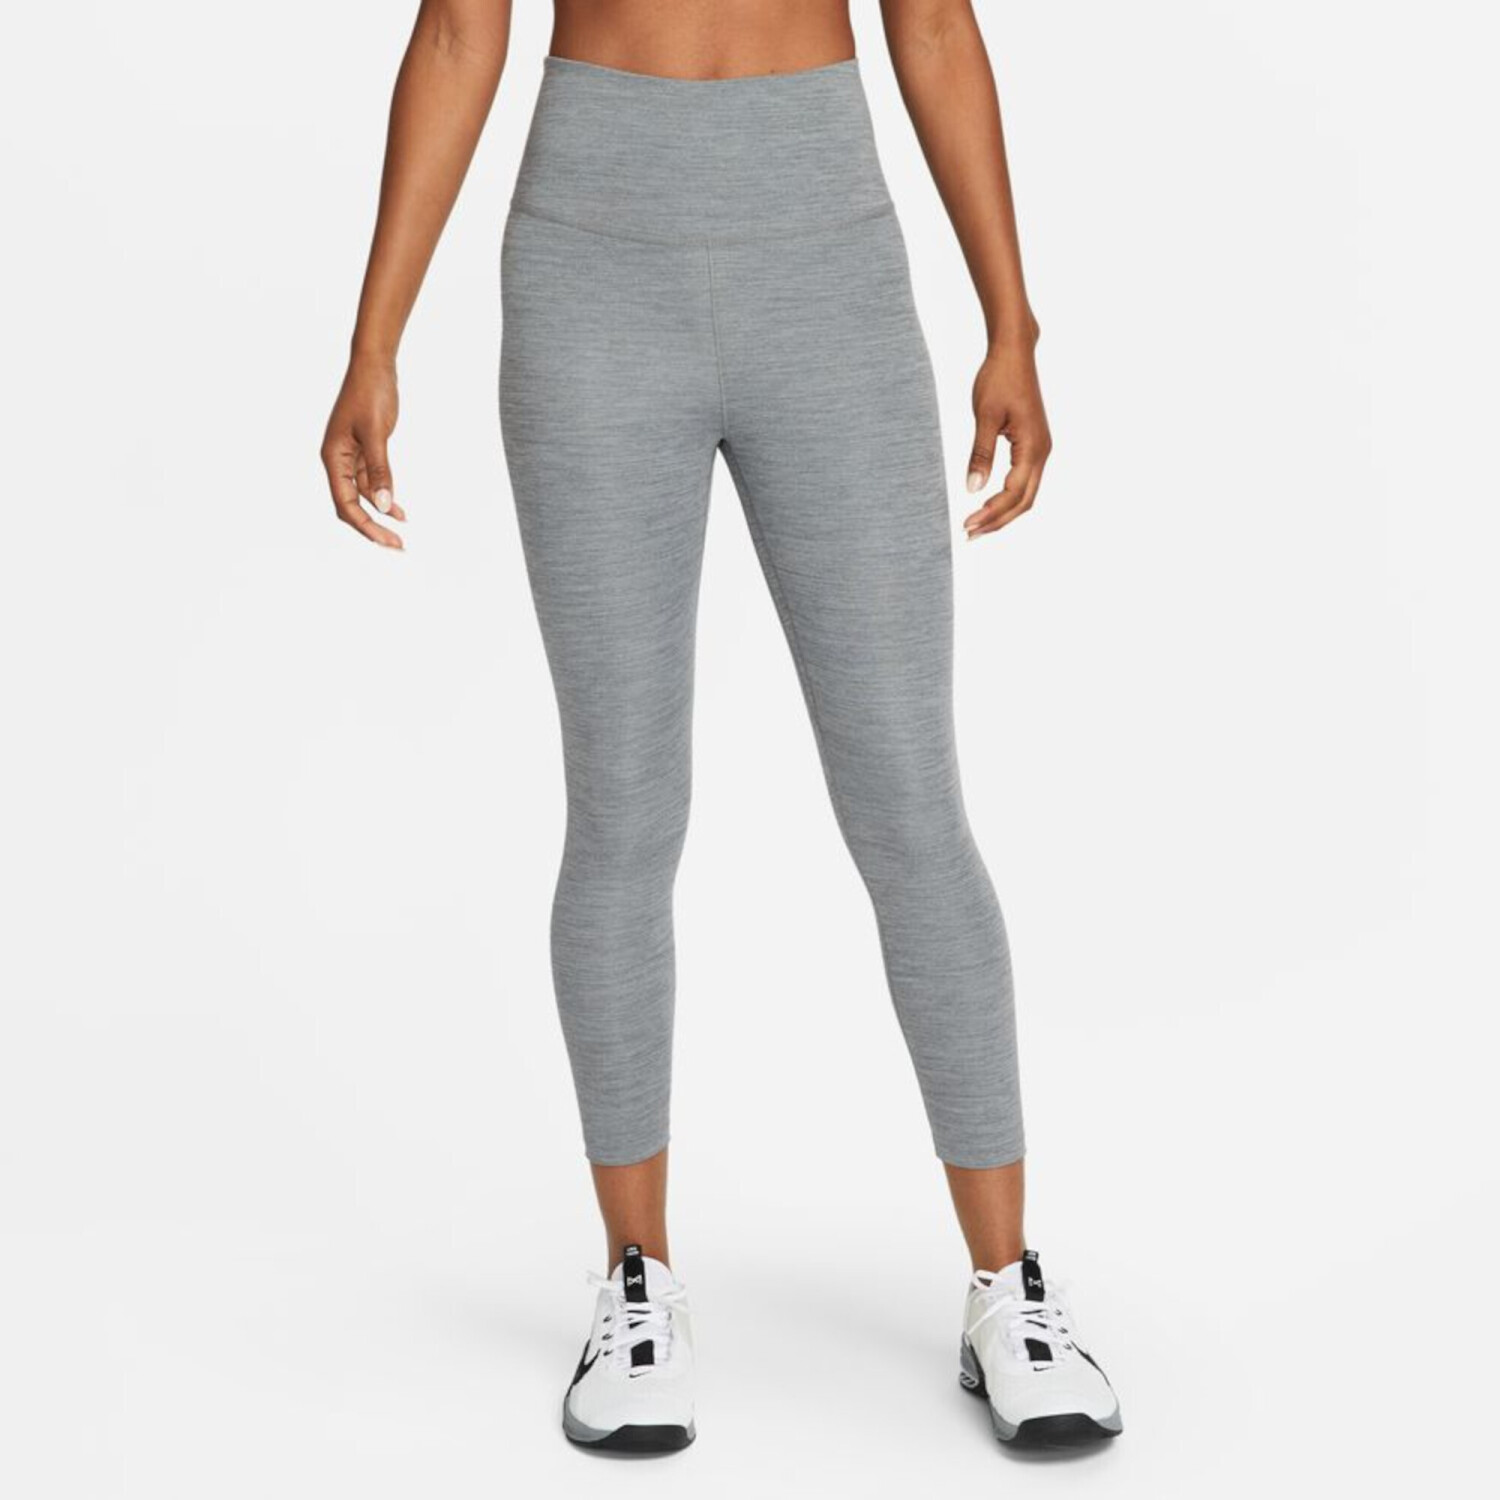 Buy Nike Women Tight High-Rise Cropped (DM7276) from £20.00 (Today